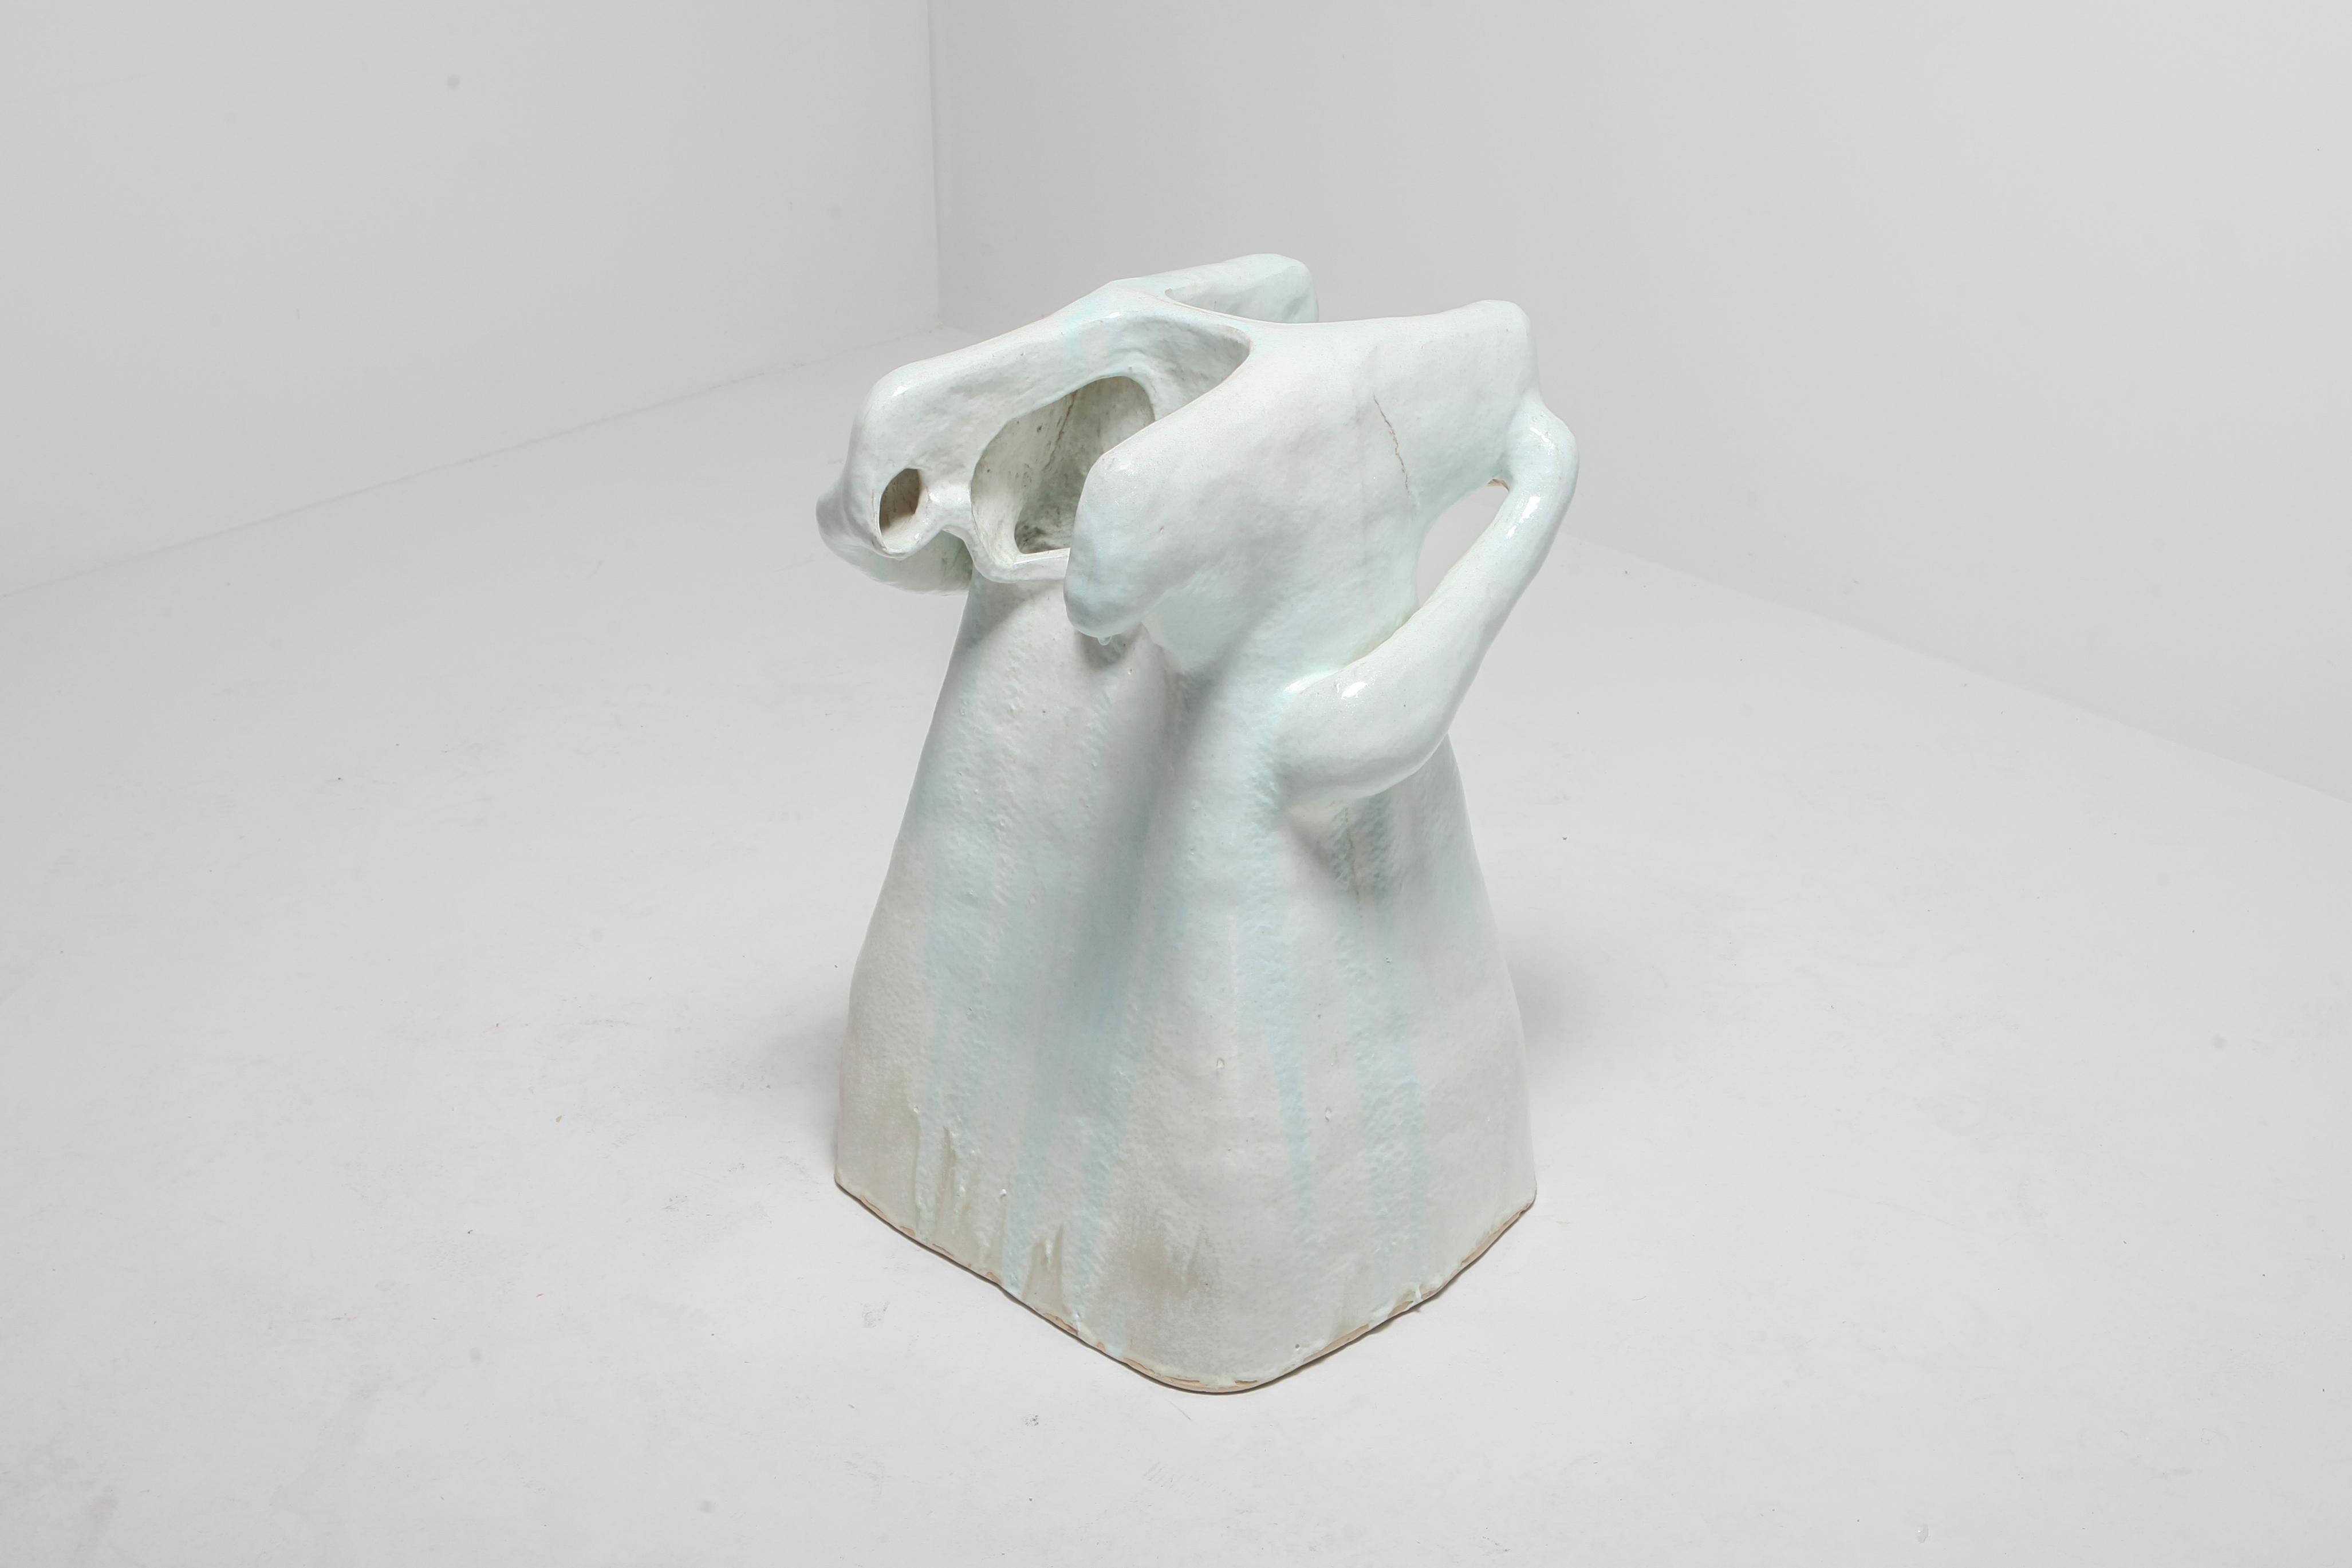 ‘Echochamber’ by Carlo Lorenzetti, 2019
Turquoise and white milky glazed stoneware
A vessel that you sit against and talk into, either by yourself or with another person.

The term “echo chamber” is used most commonly today to described a closed